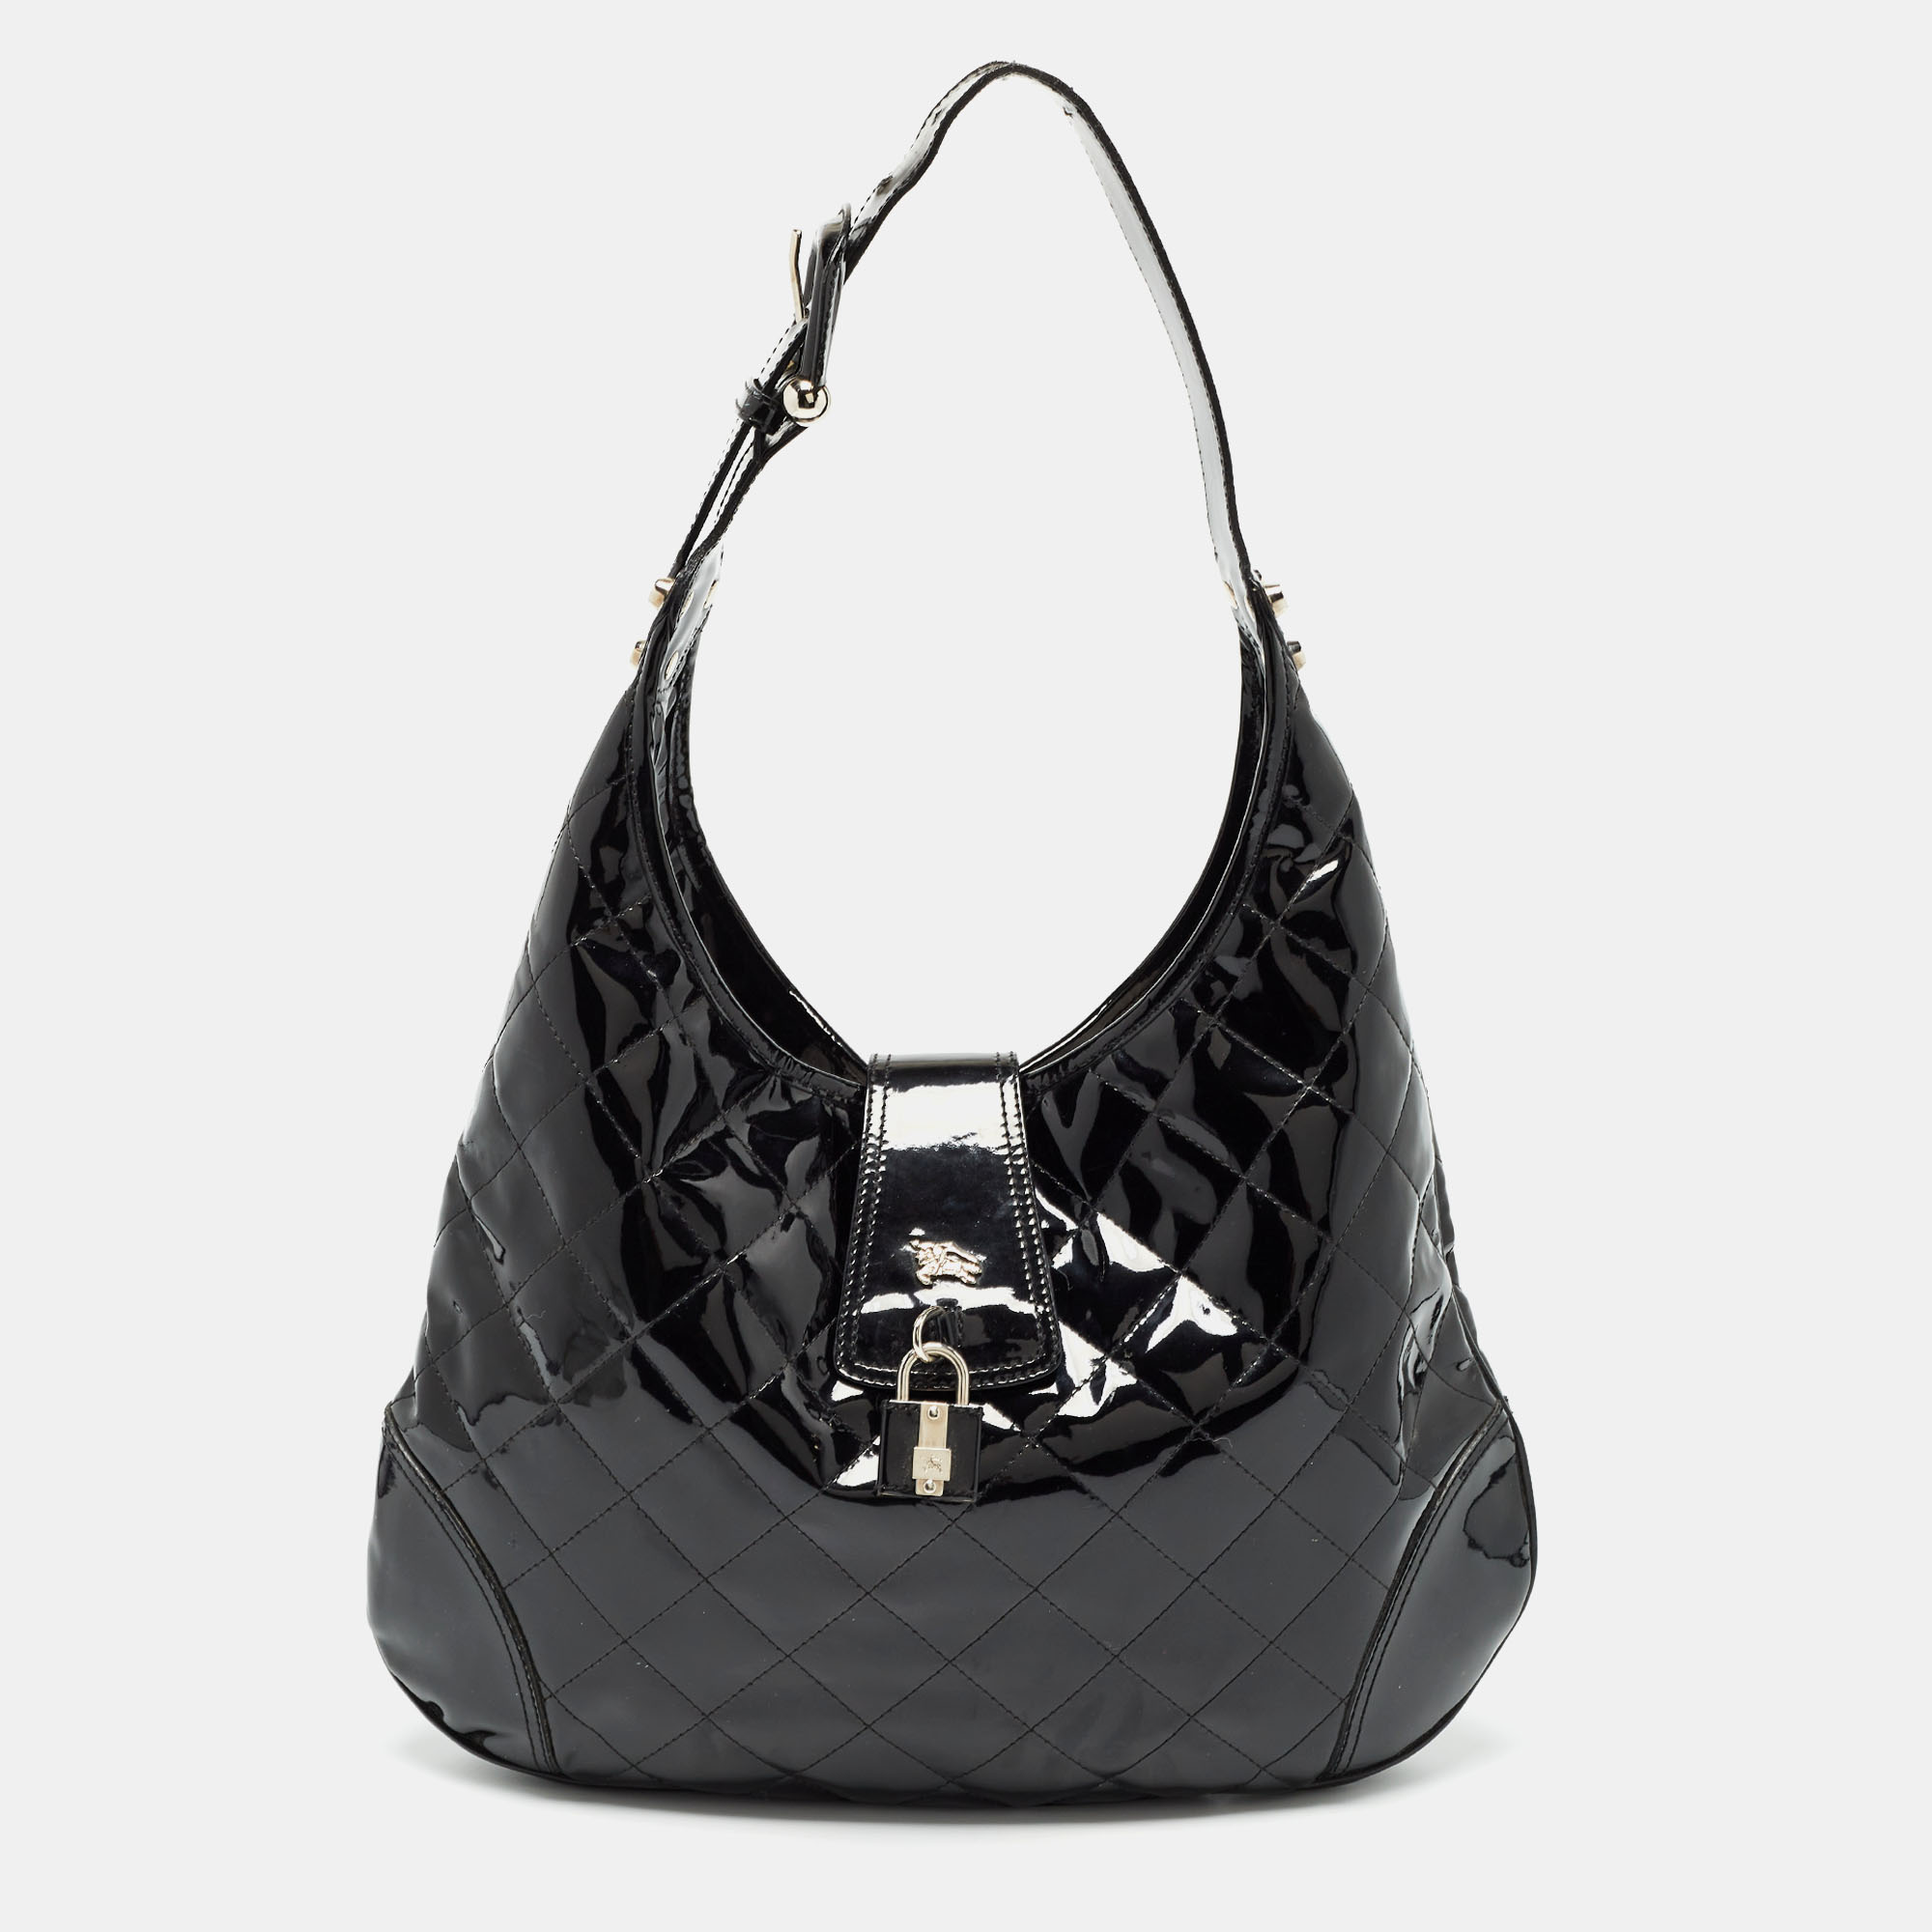 Pre-owned Burberry Black Quilted Patent Leather Brooke Hobo